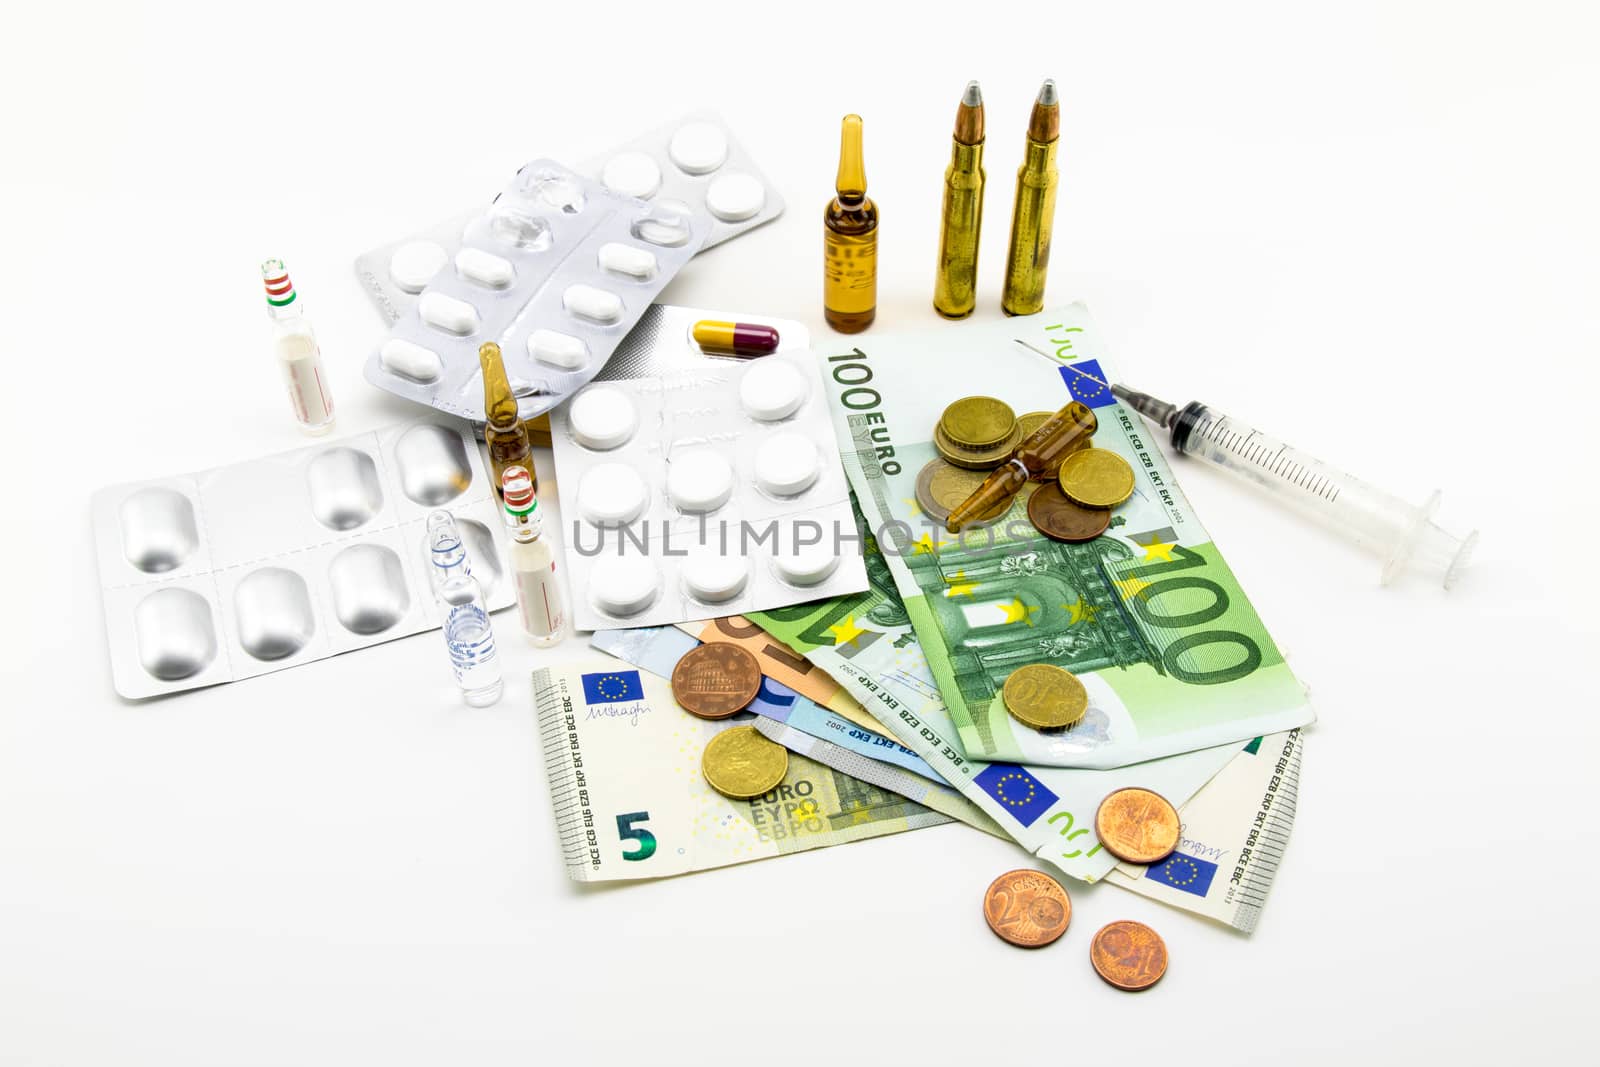 composition with euros, bullets, drugs on white background